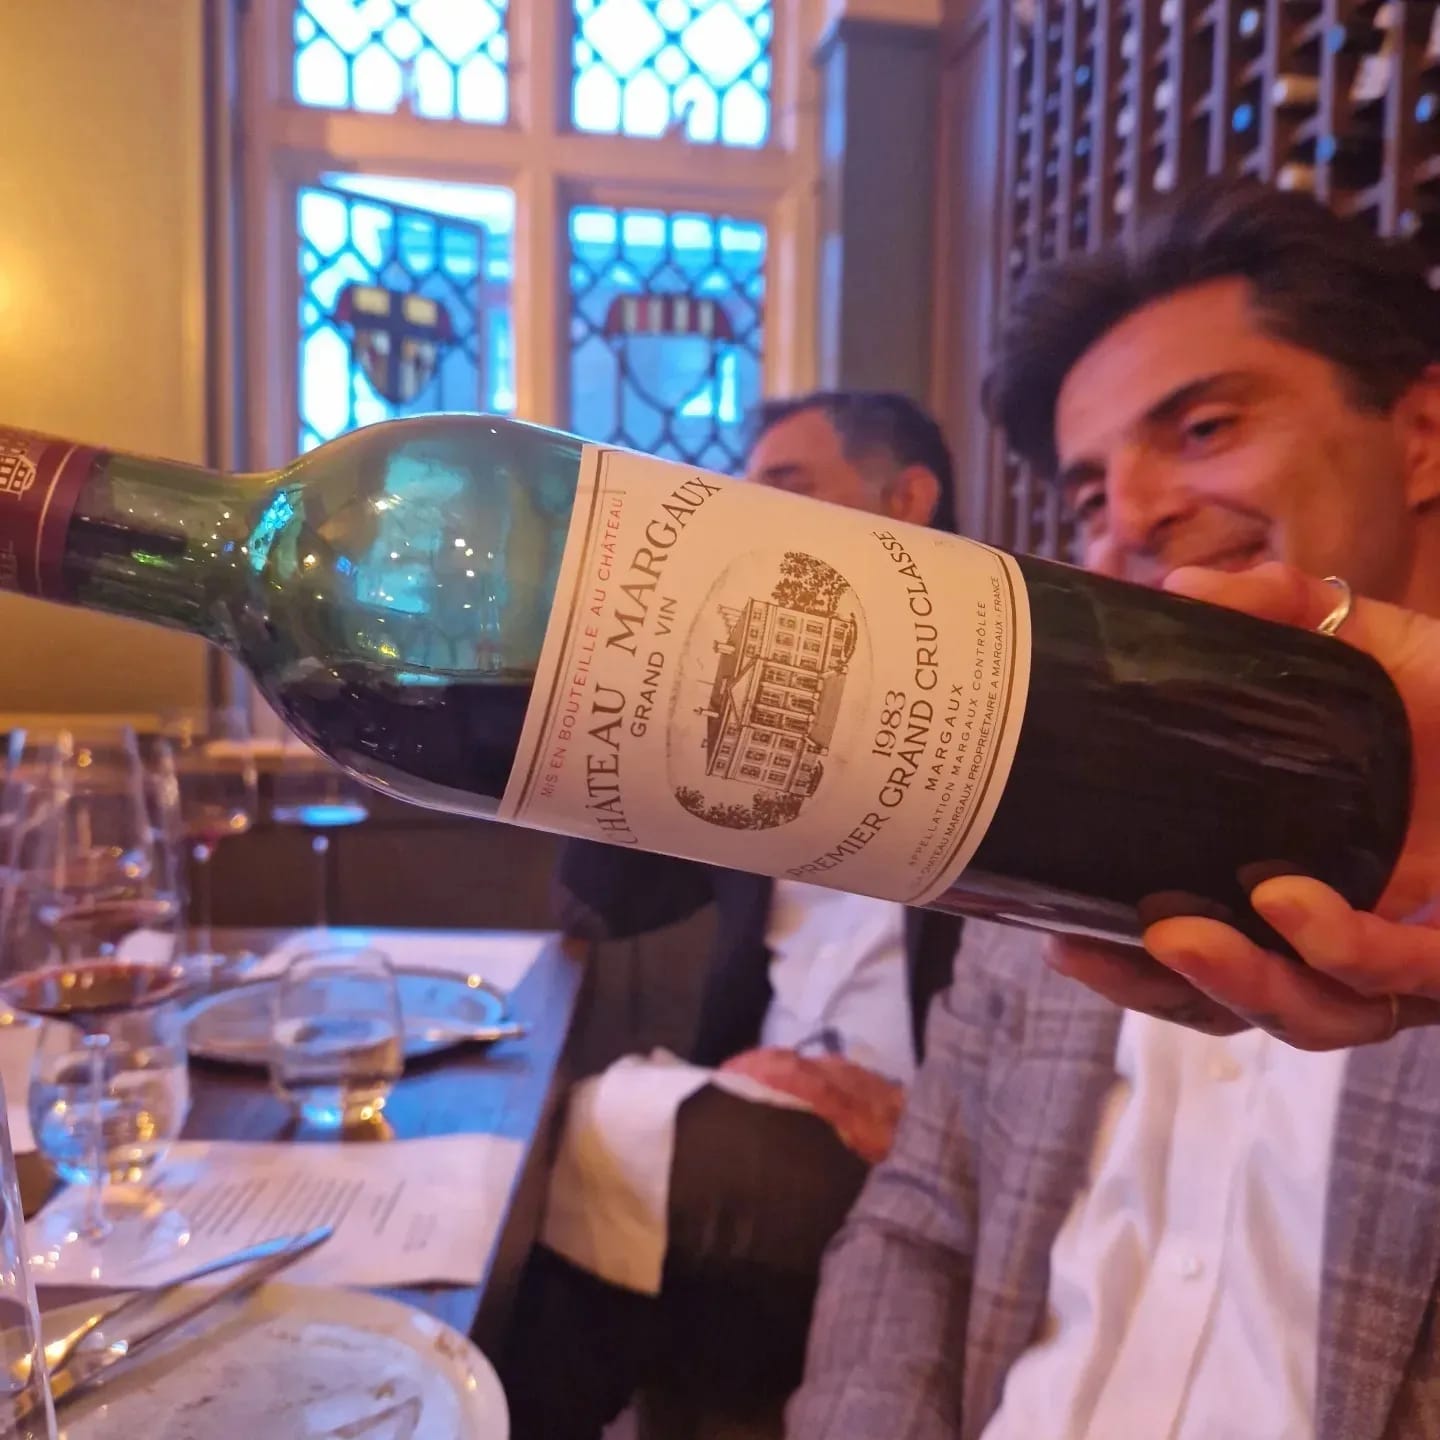 Dinner with Château Margaux